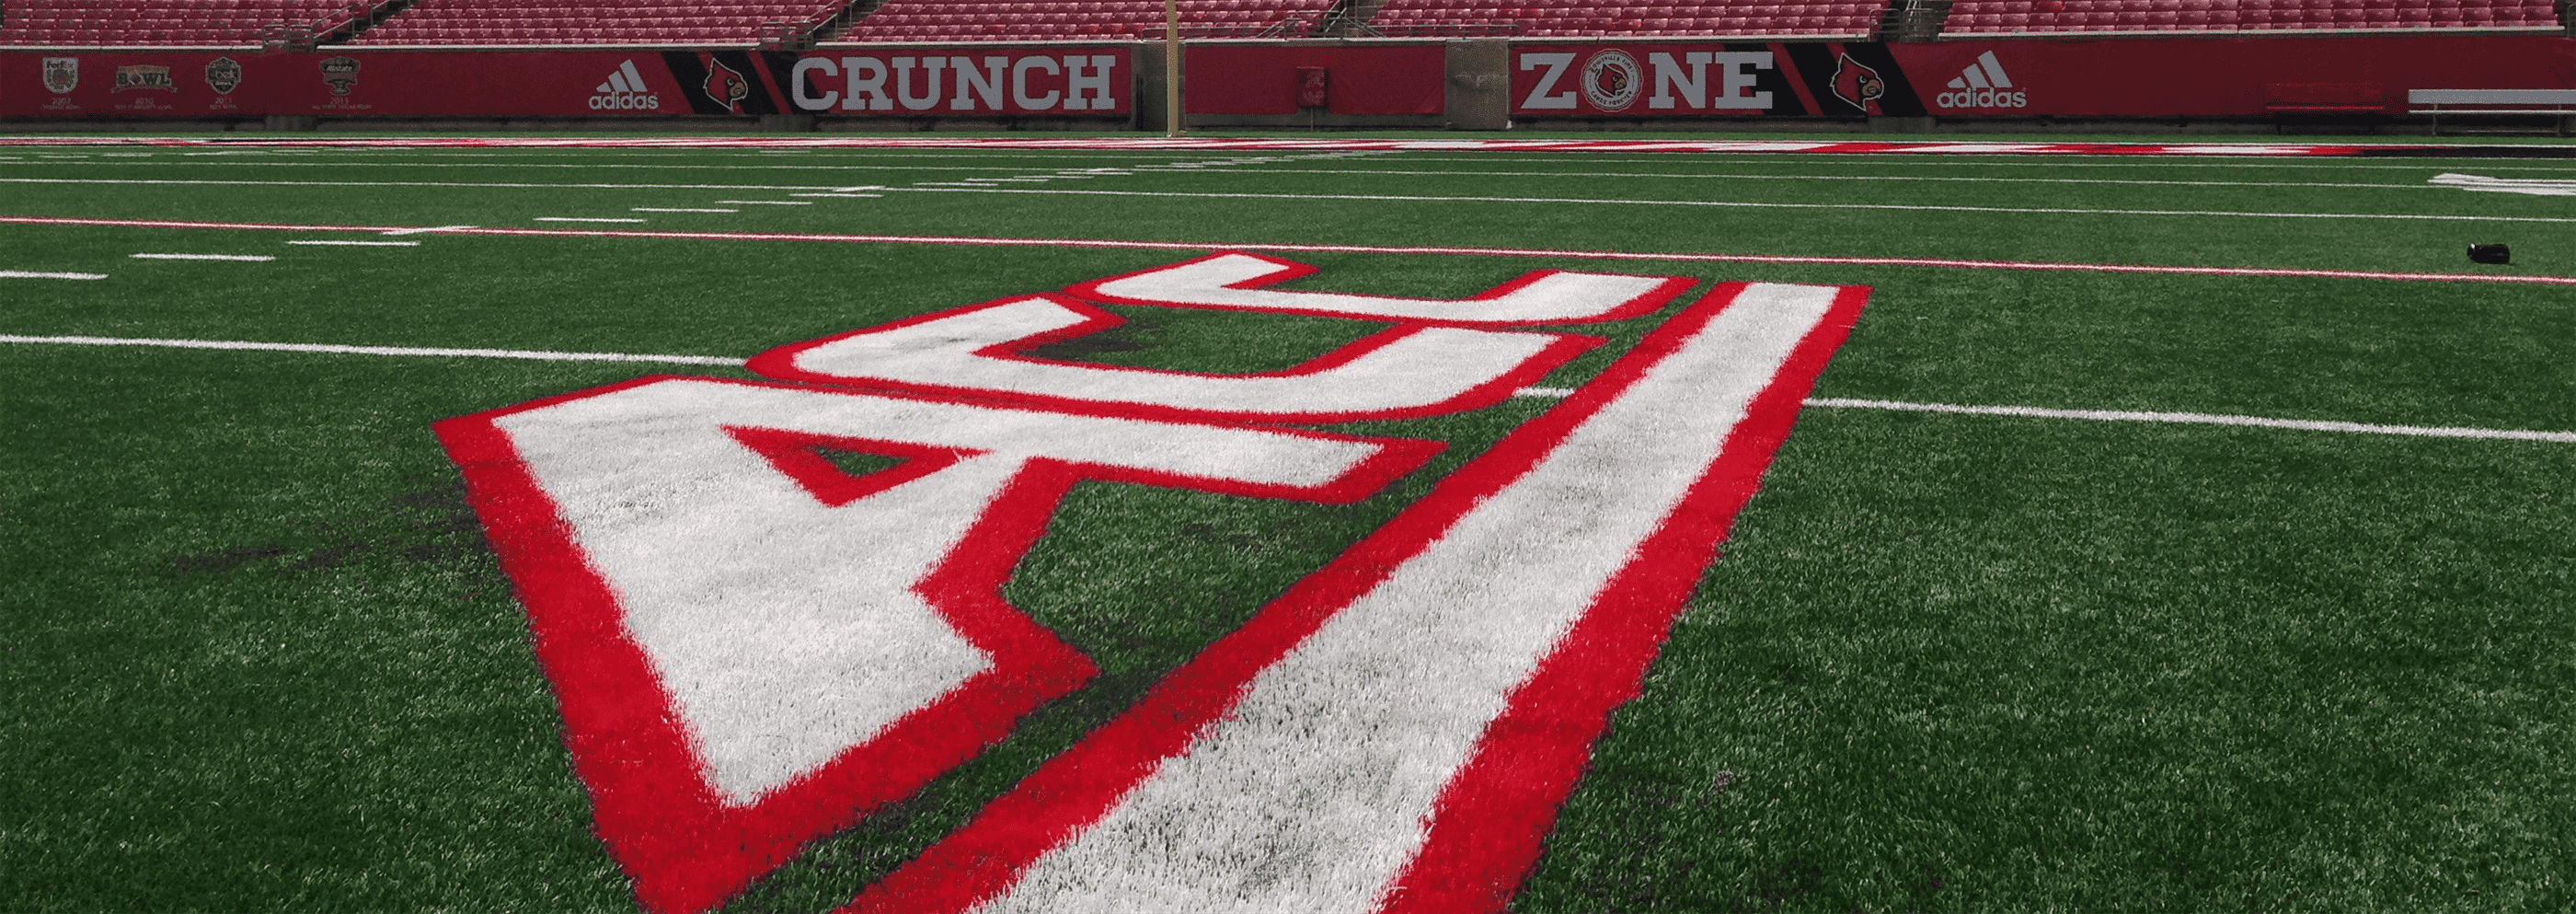 ACC Logo on Field at Papa John's Cardinal Stadium Summer 2014 Photo by Mark Blankenbaker Fitted